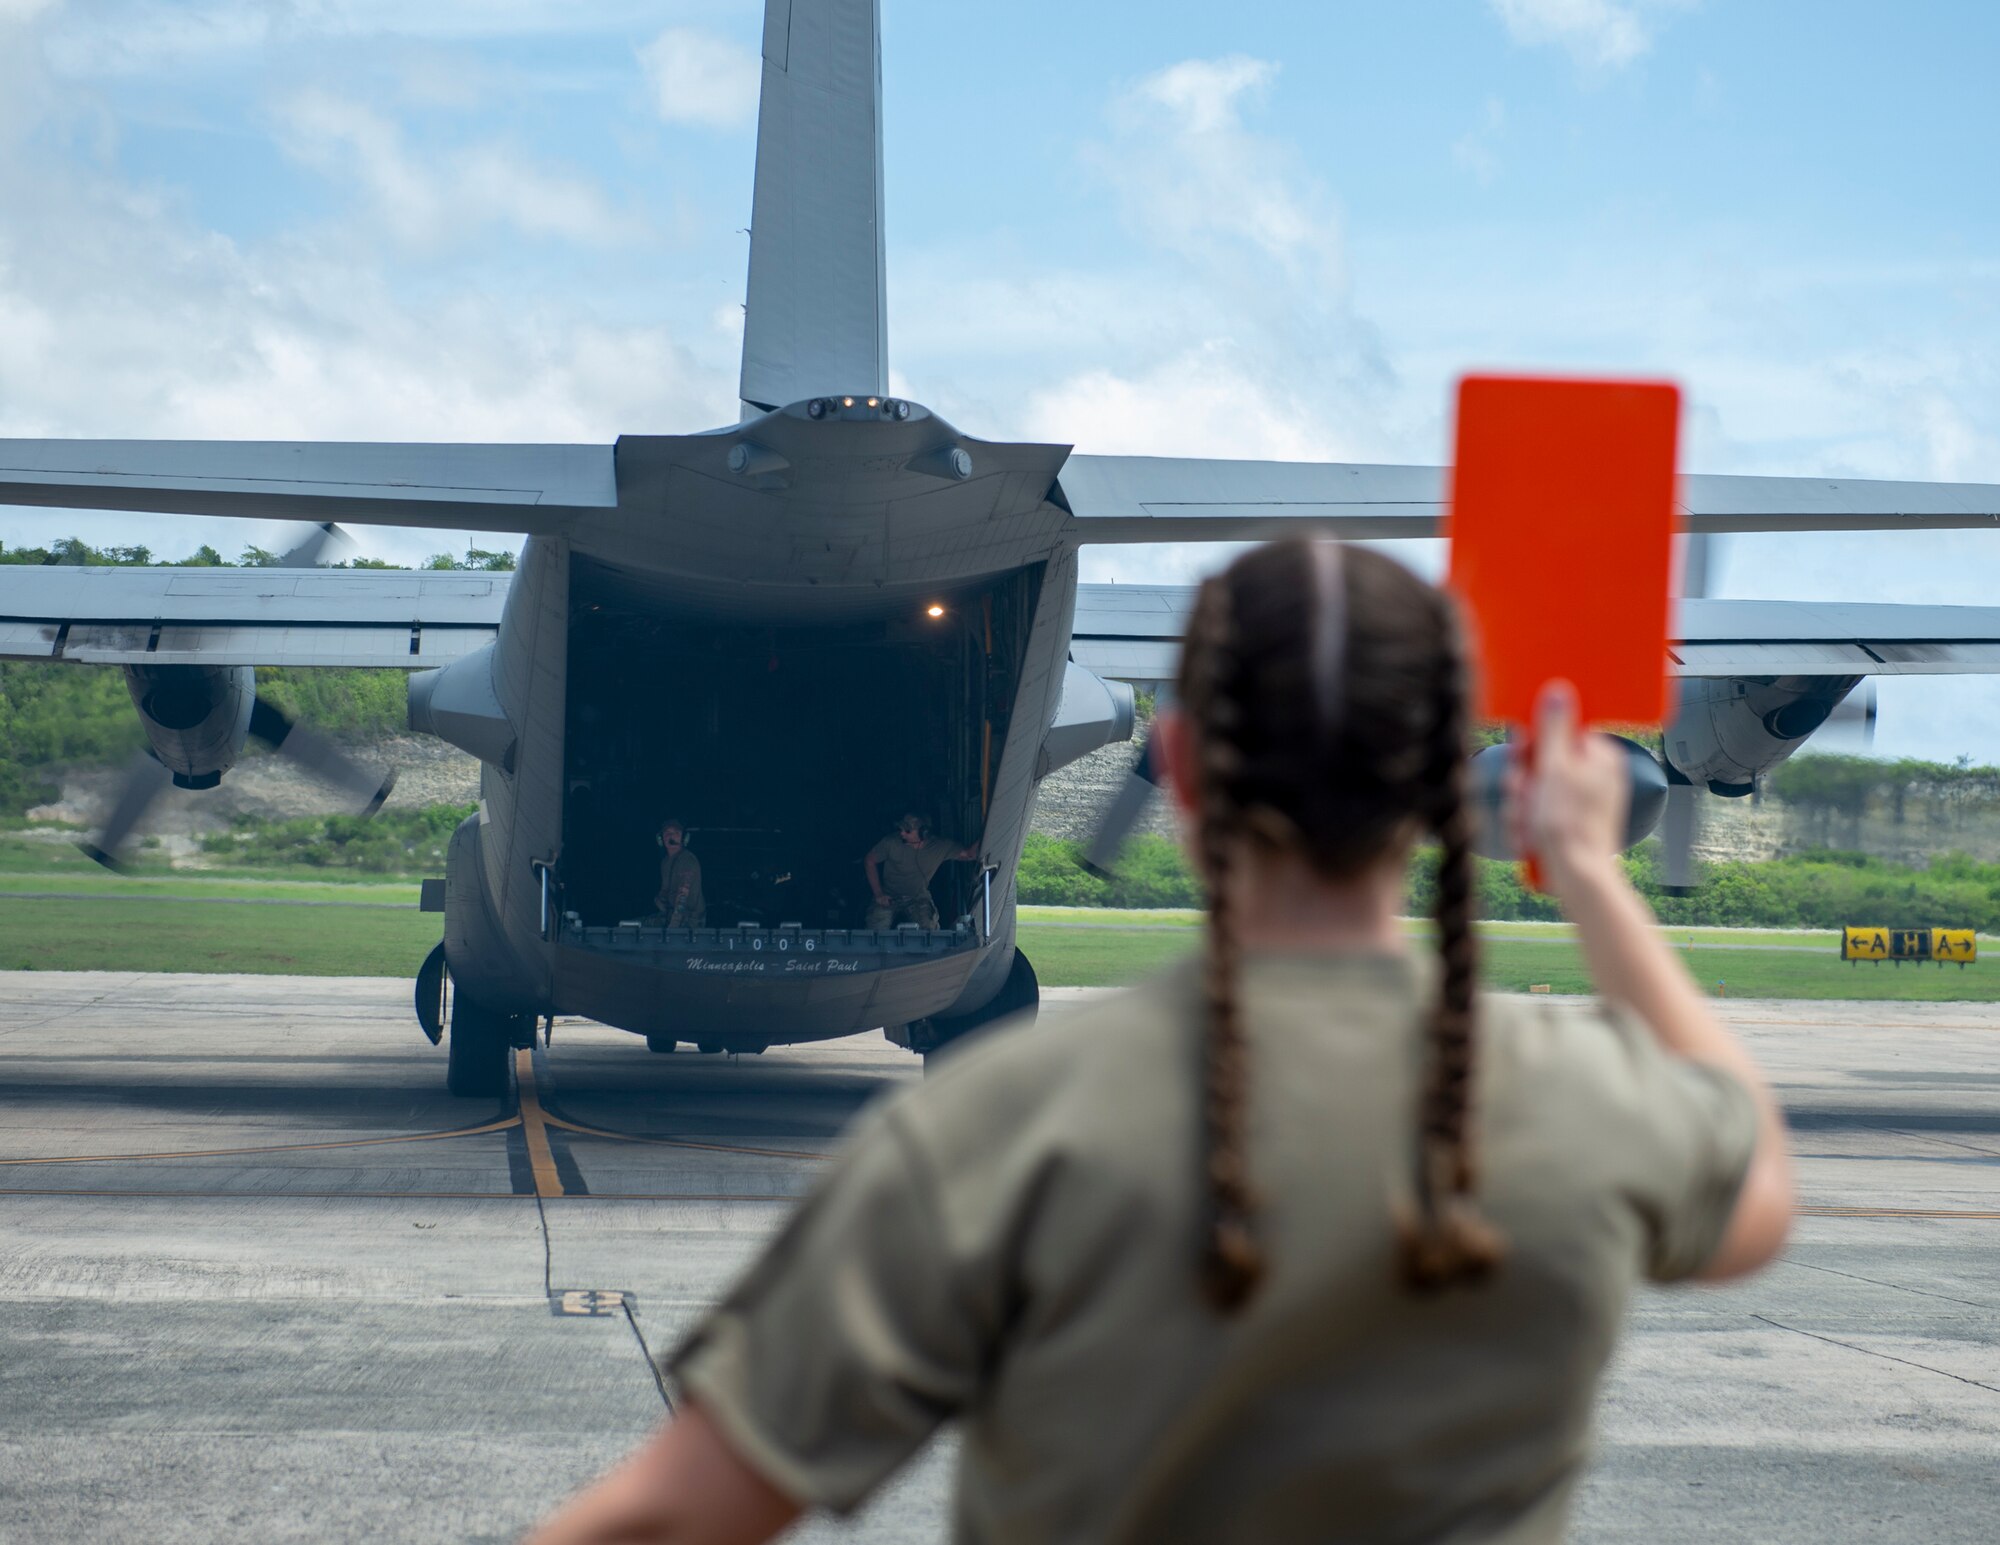 U.S. Air Force C-130 Hercules from the Minnesota Air National Guard, backs up onto the ramp in St. Croix, Virgin Islands, Aug. 17, 2021.